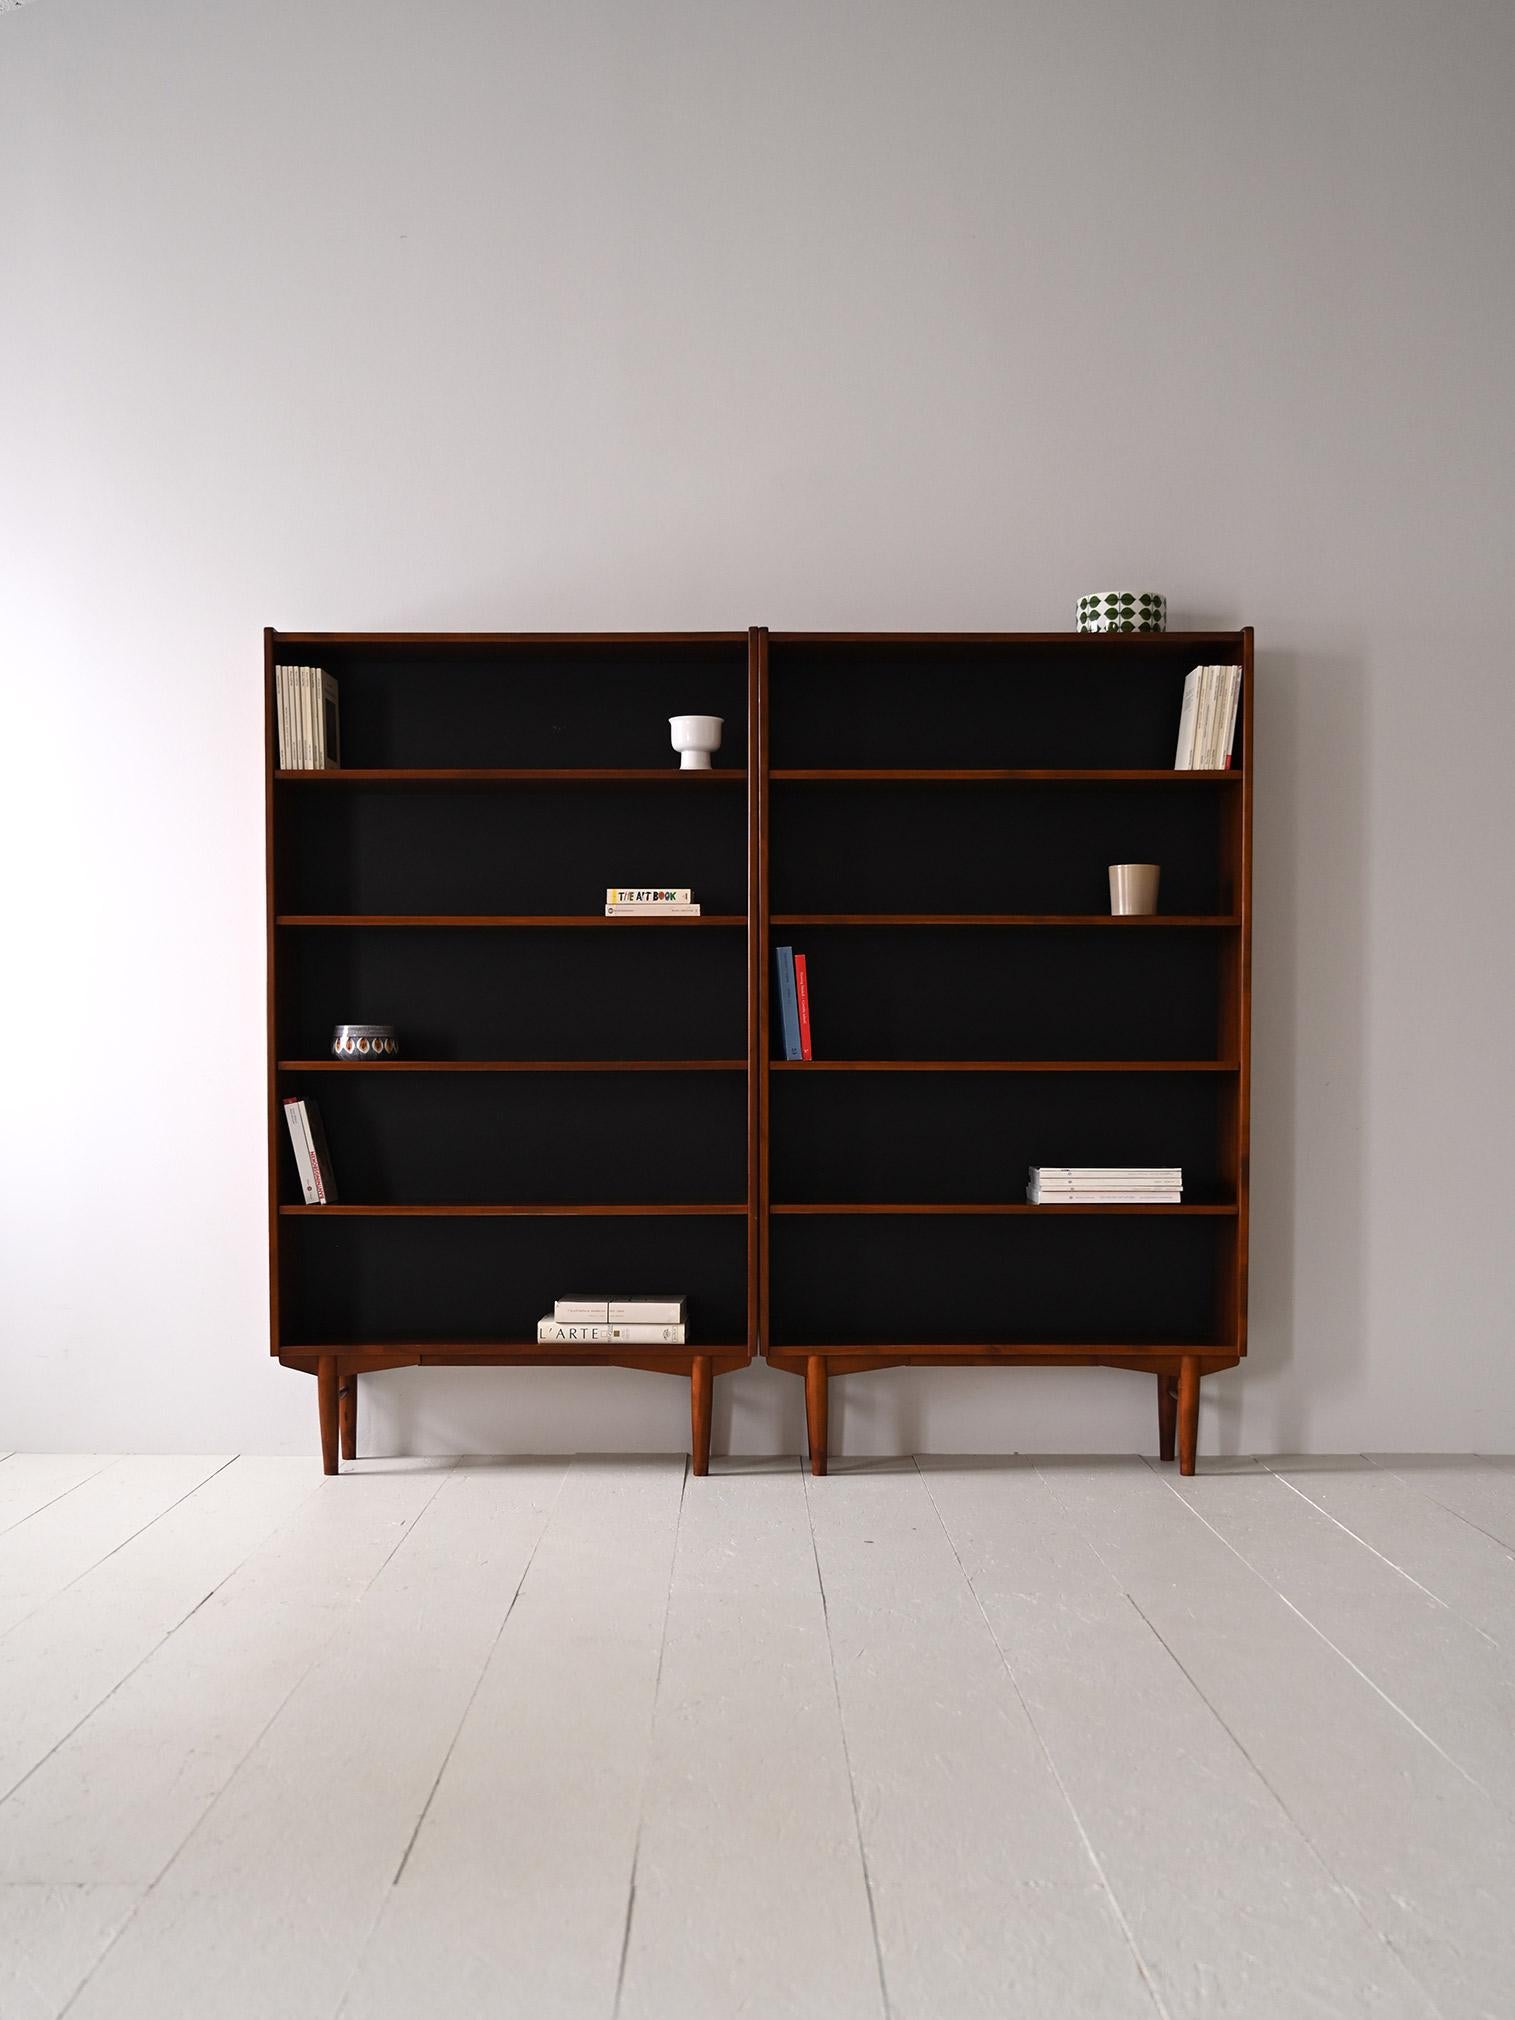 Elegant Scandinavian bookcases from the 1960s.

The minimalist and functional design of this furniture is the feature that makes it modern and suitable for inclusion even in already furnished homes.  In addition, the black-colored bottom gives them